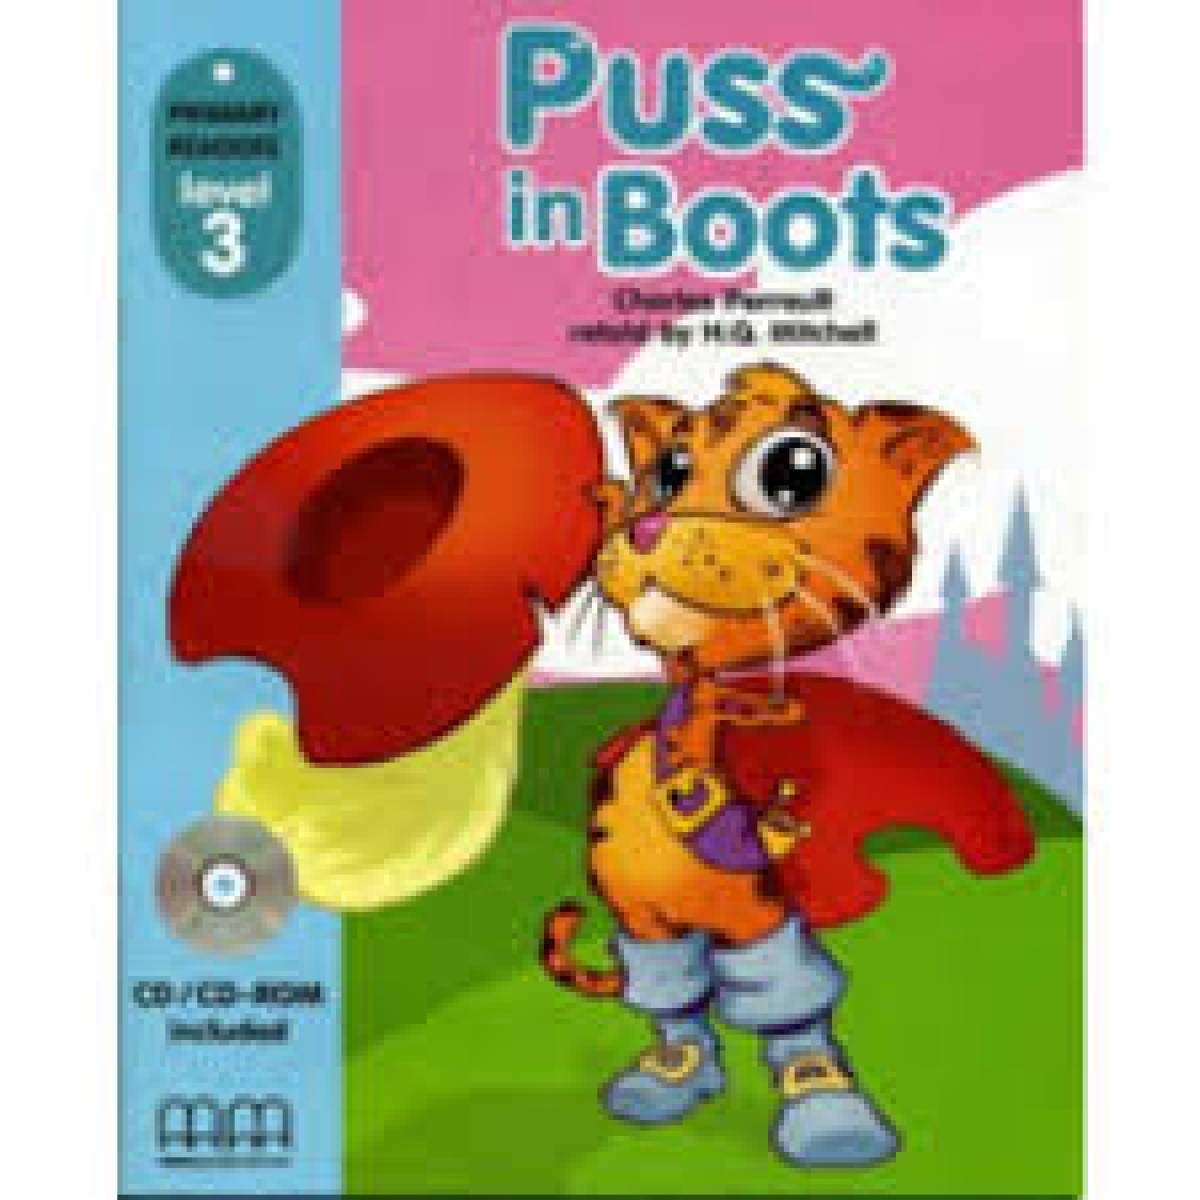 Primary Reader Level 3 Puss in Boots, Book With Audio CD 